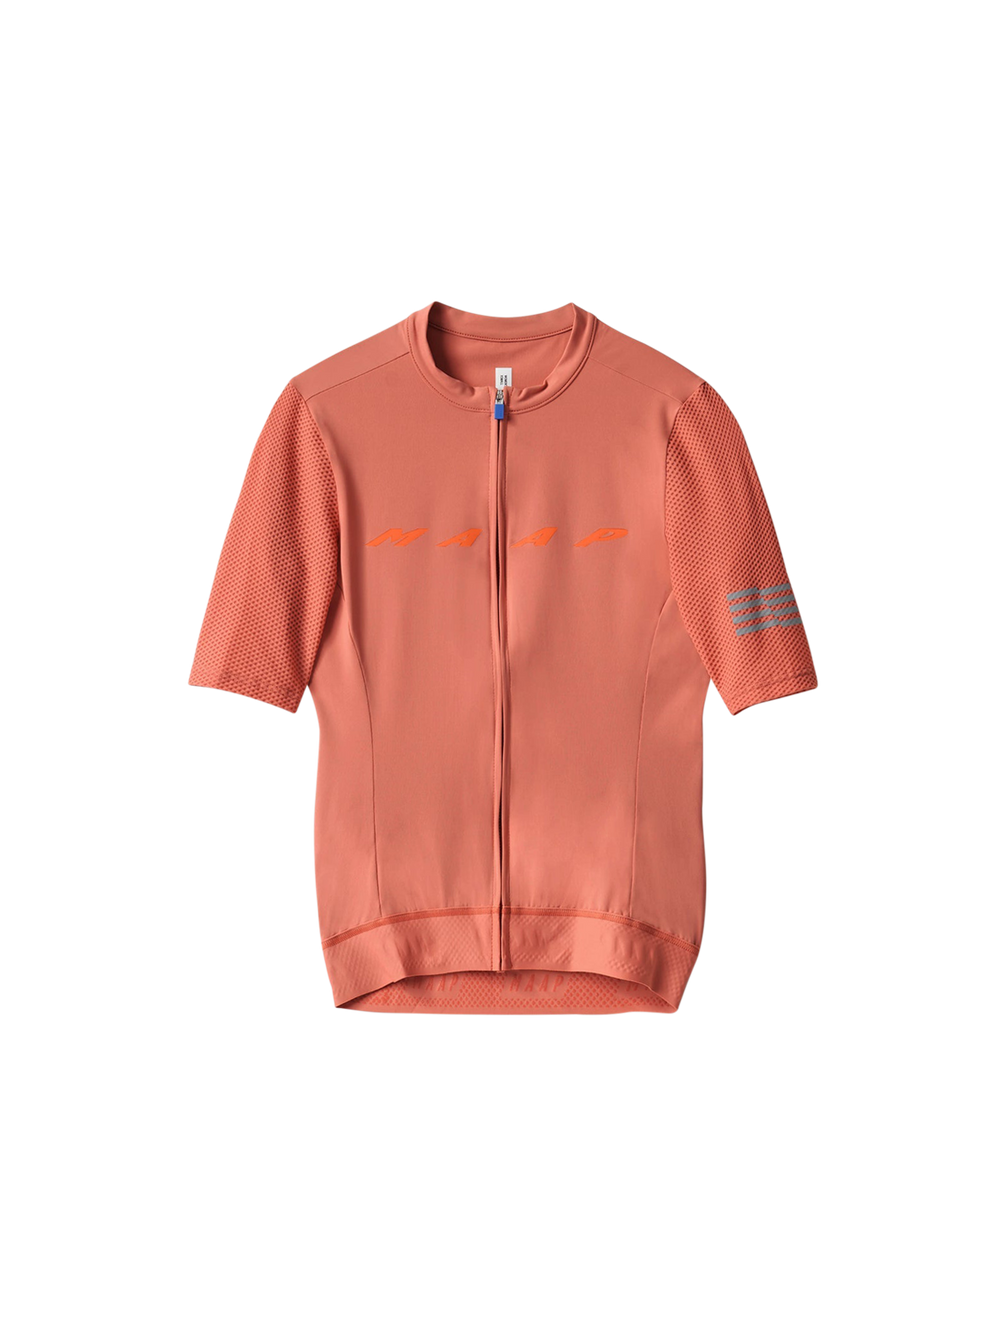 Product Image for Women's Evade Pro Base Jersey